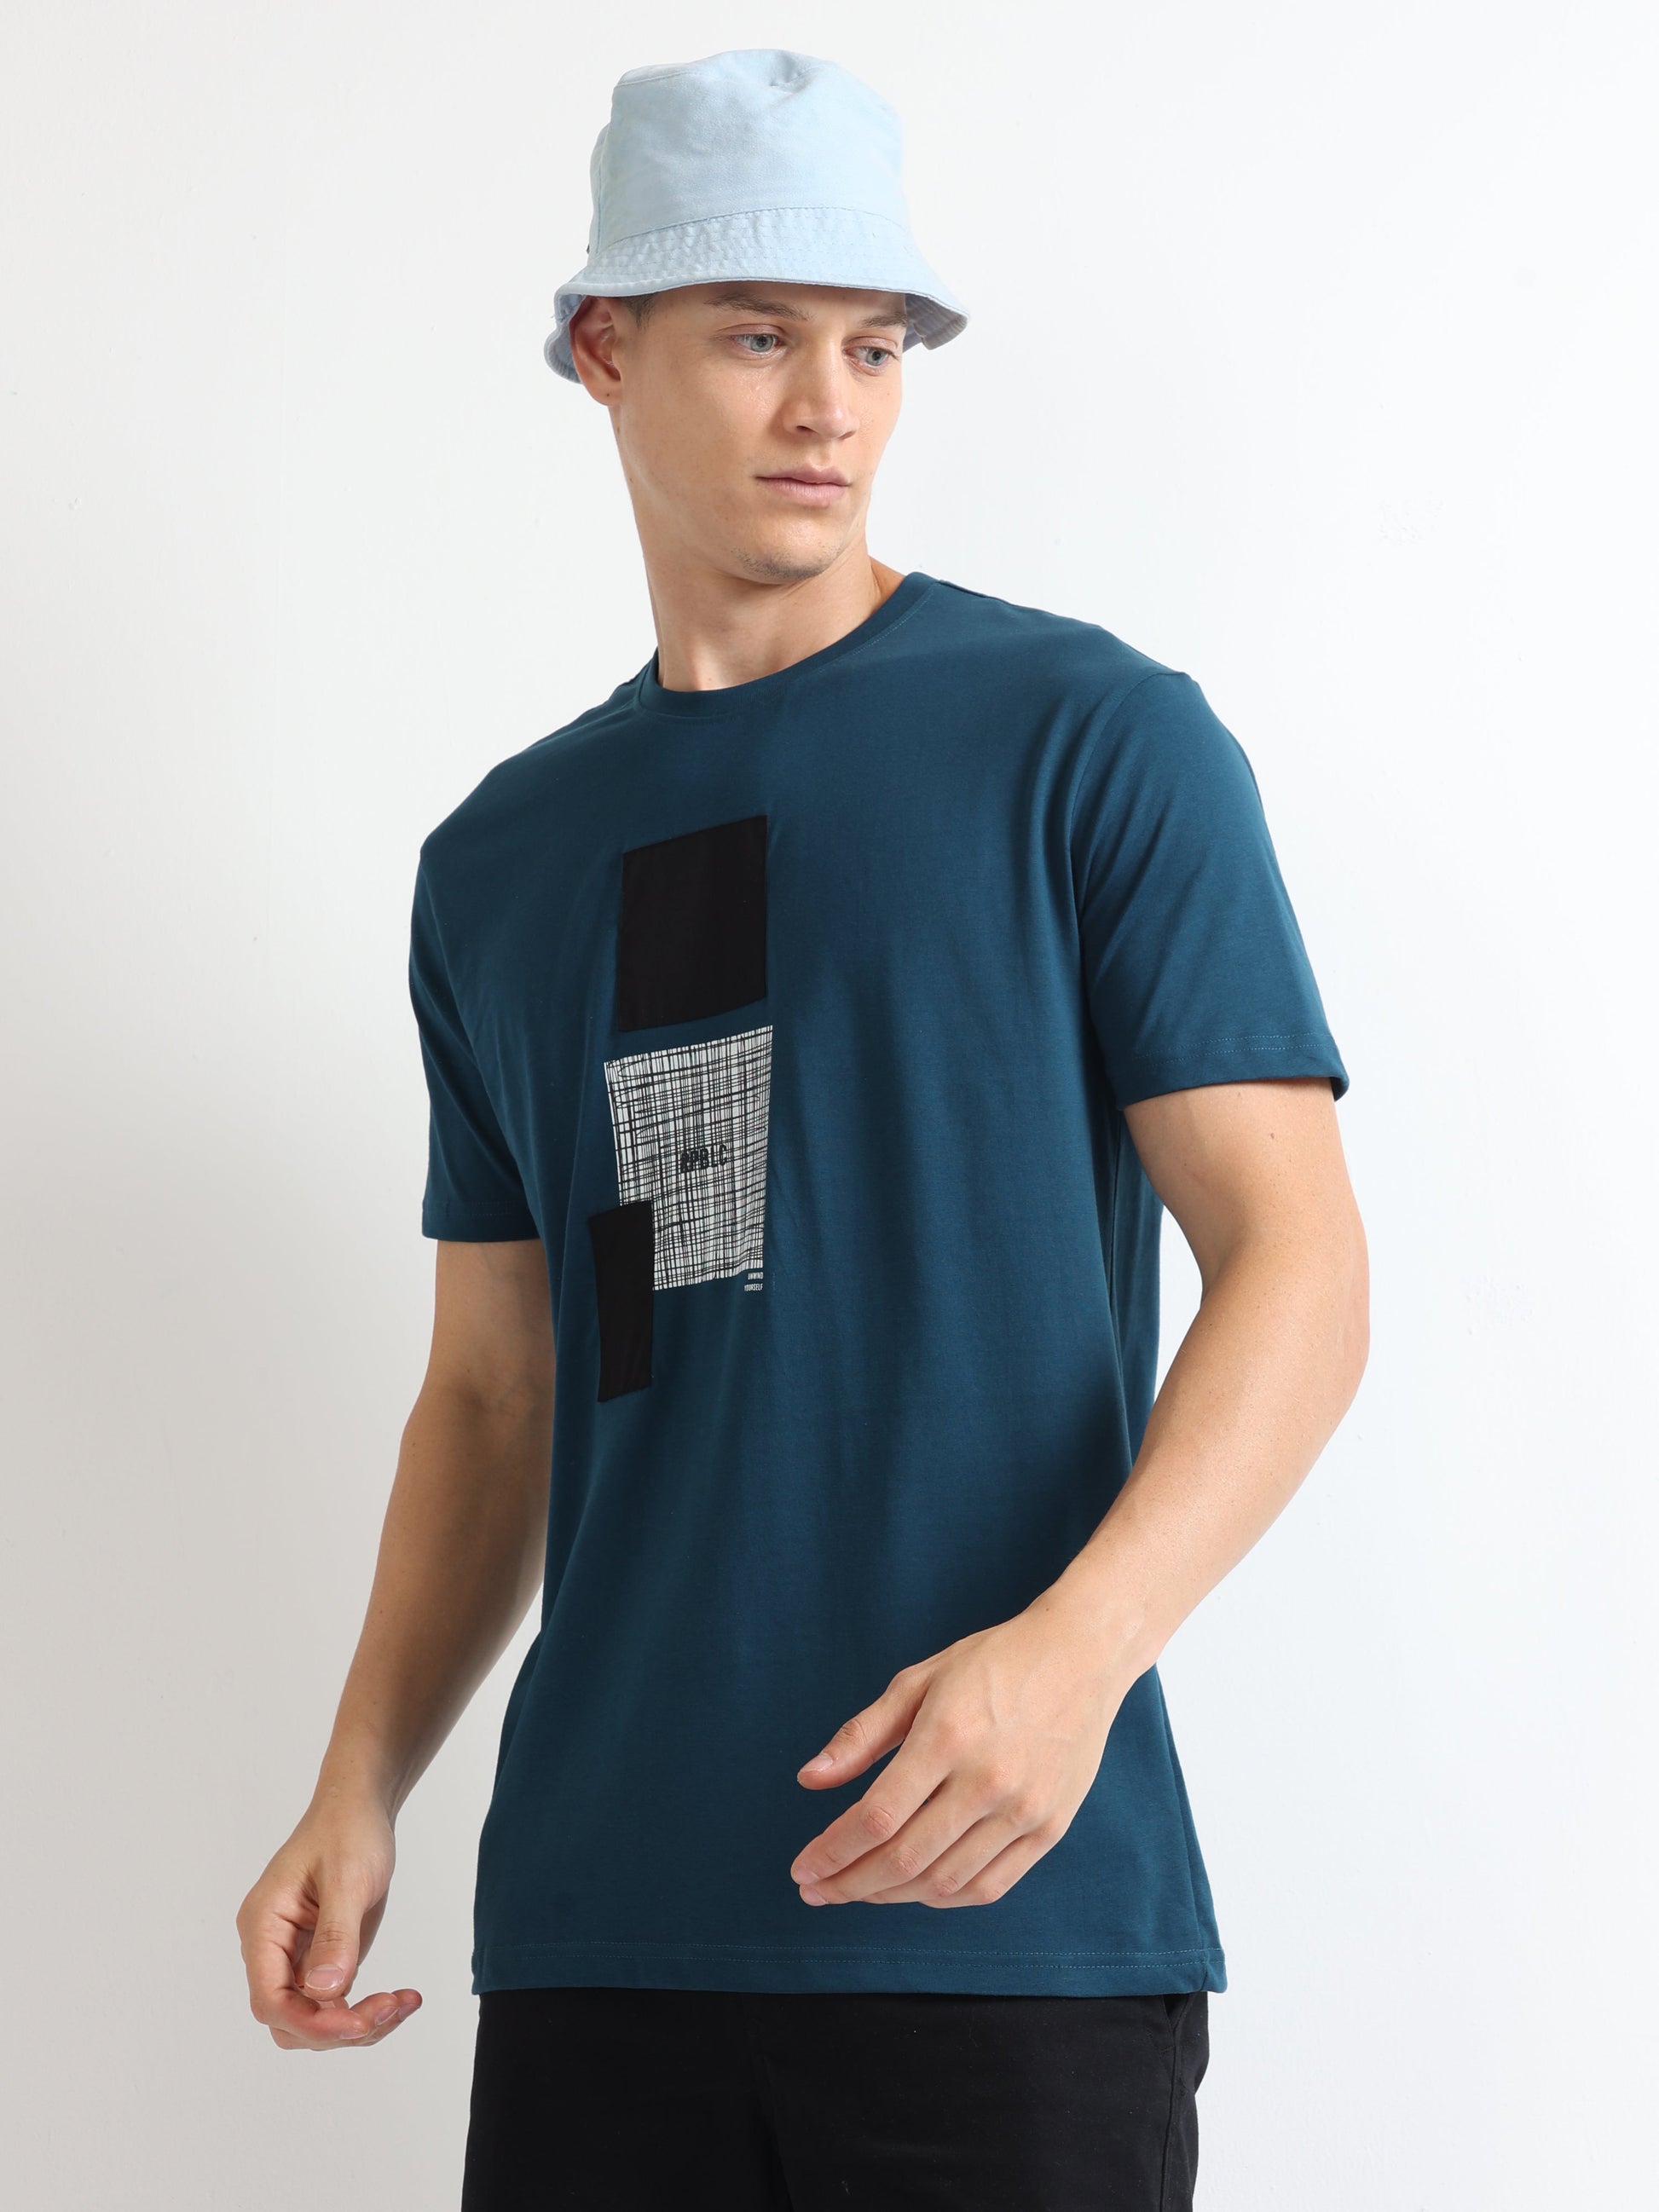 Teal Crew Neck Chest Graphic Printed T Shirt